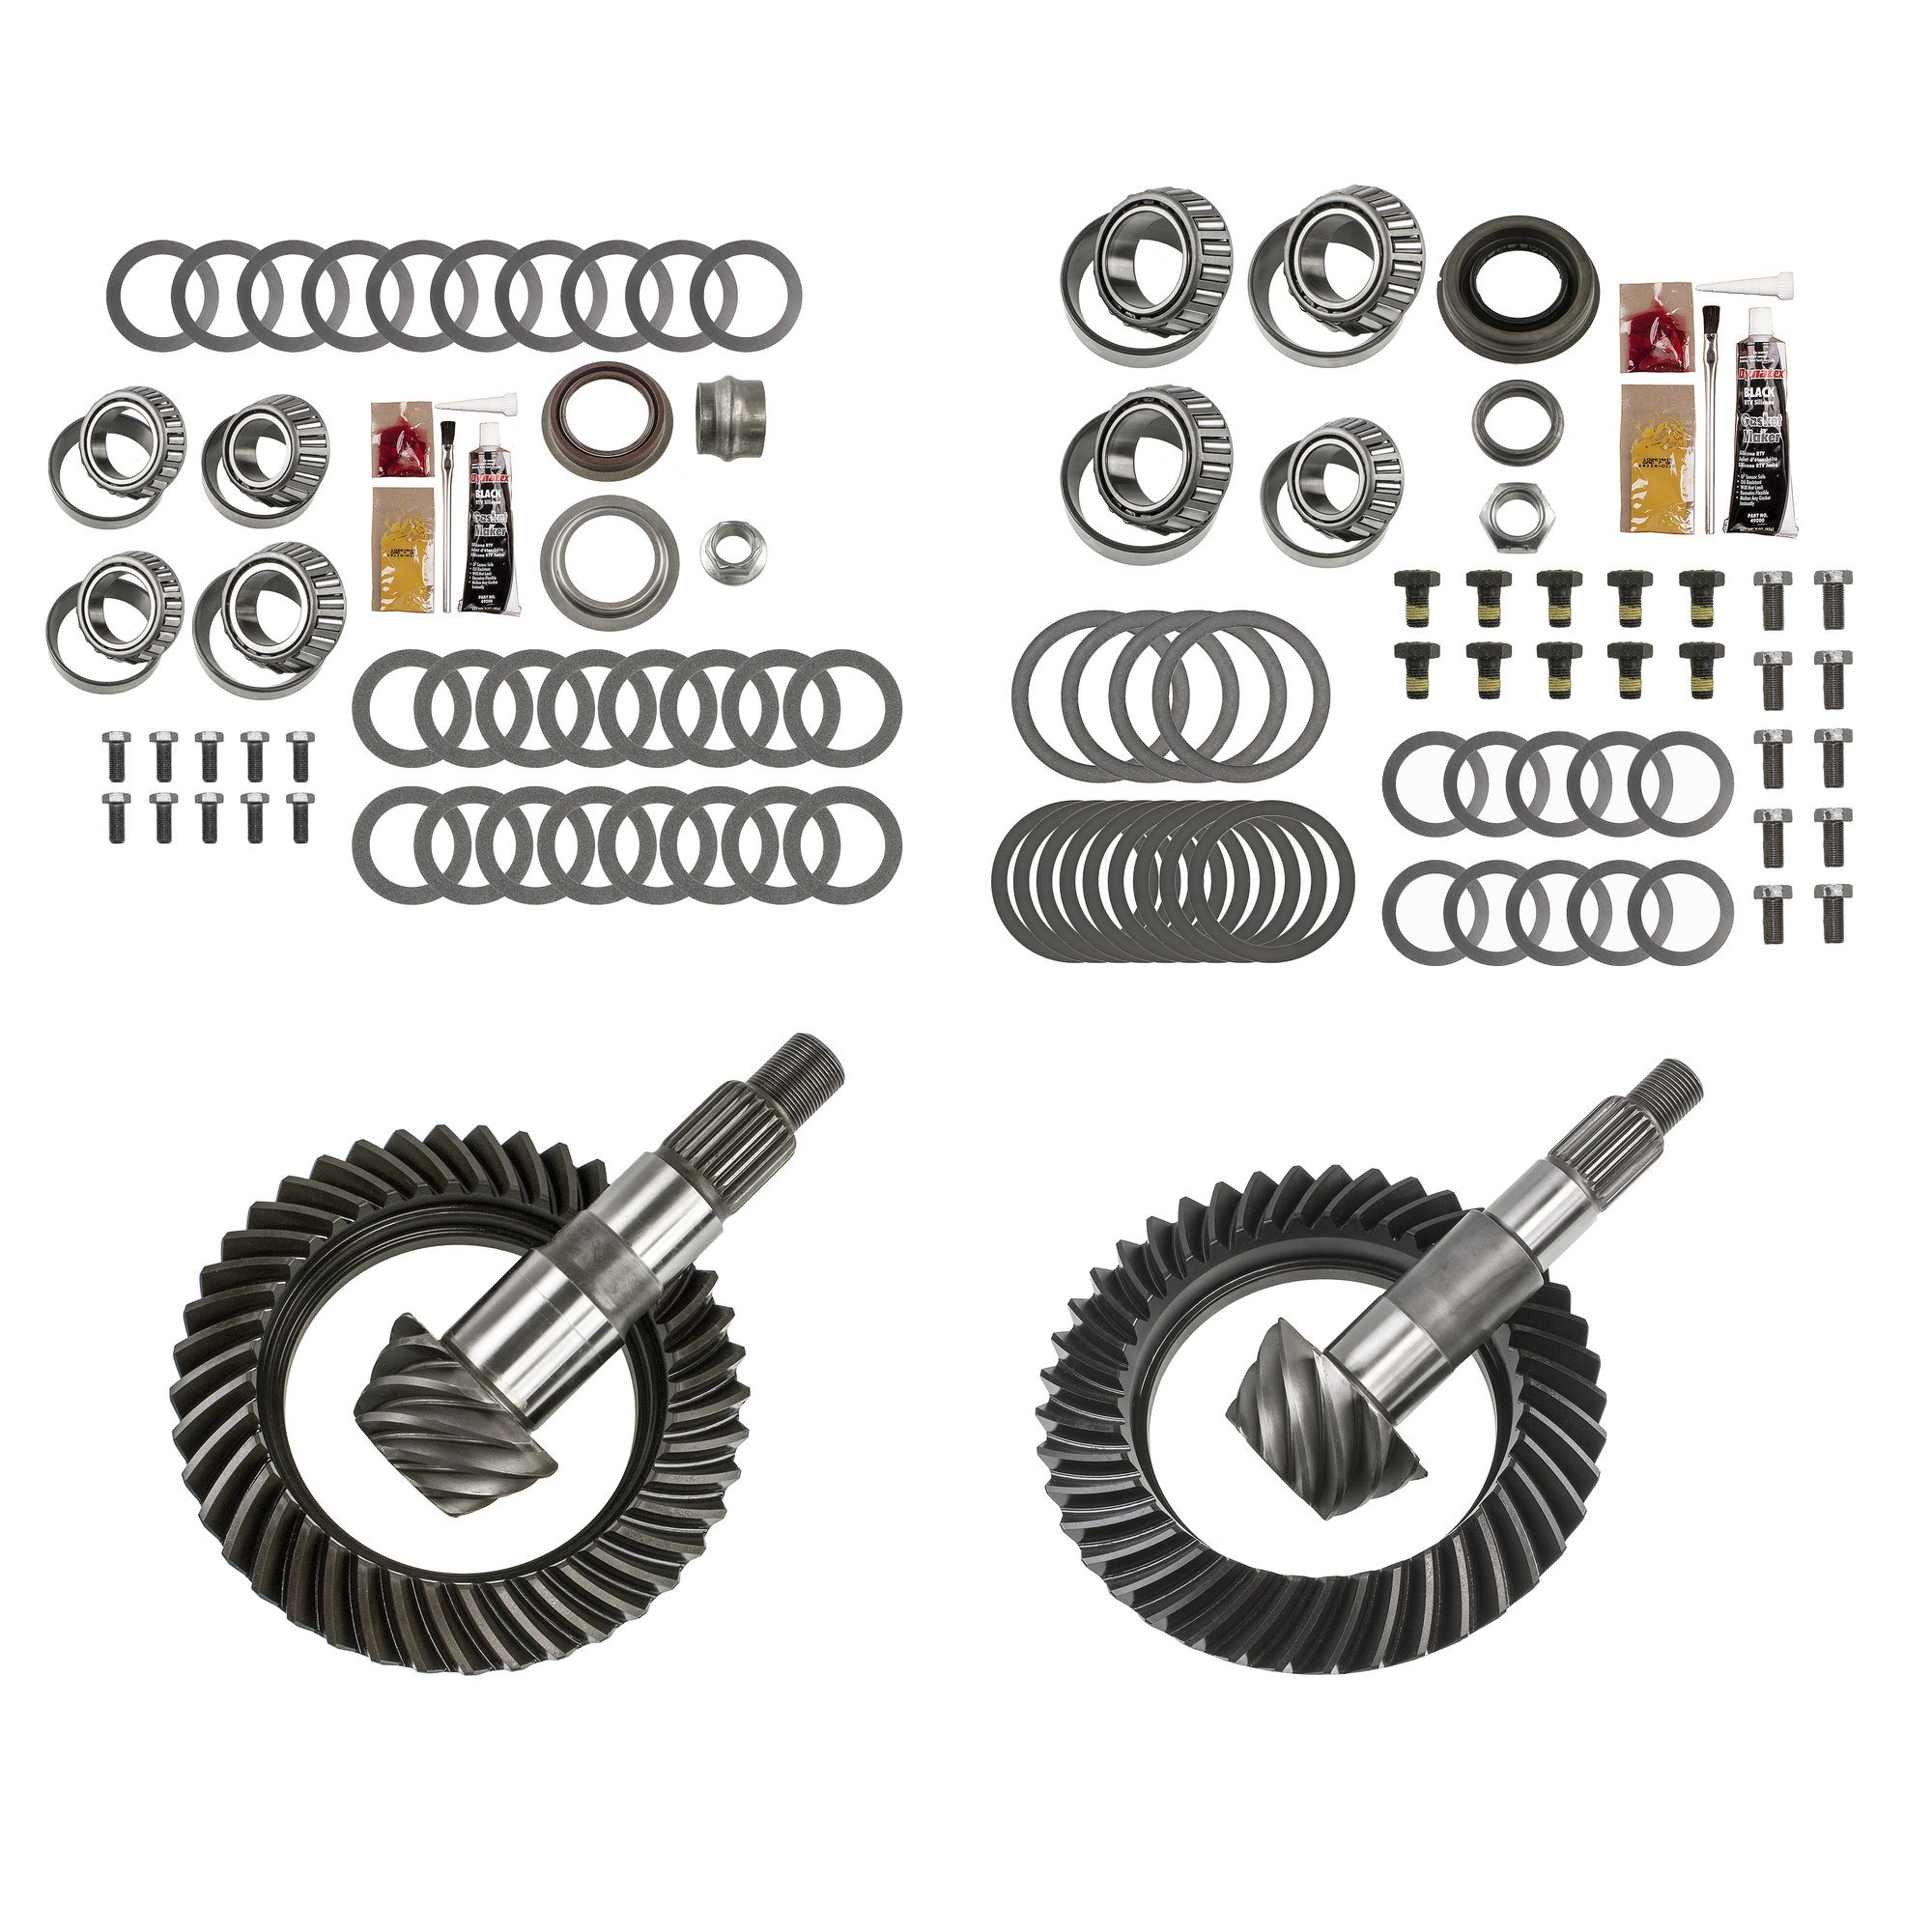 Motive Gear Front and Rear Ring and Pinion with Master Install Kits for  07-18 Jeep Wrangler JK with Dana 30 Front and Dana 44 Rear | Quadratec